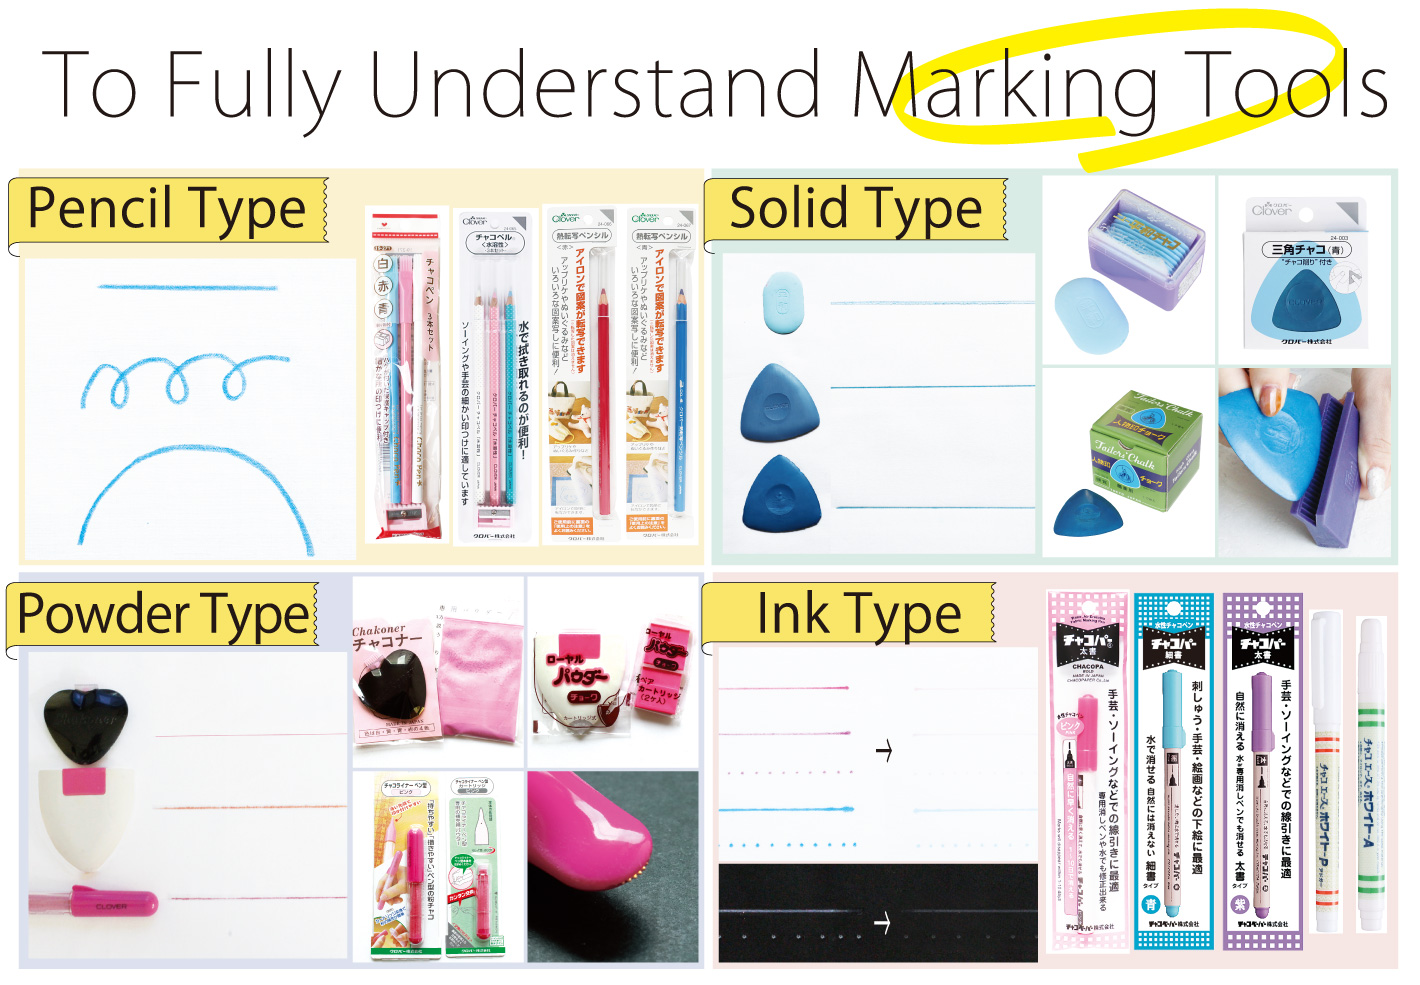 Special feature on sewing markers